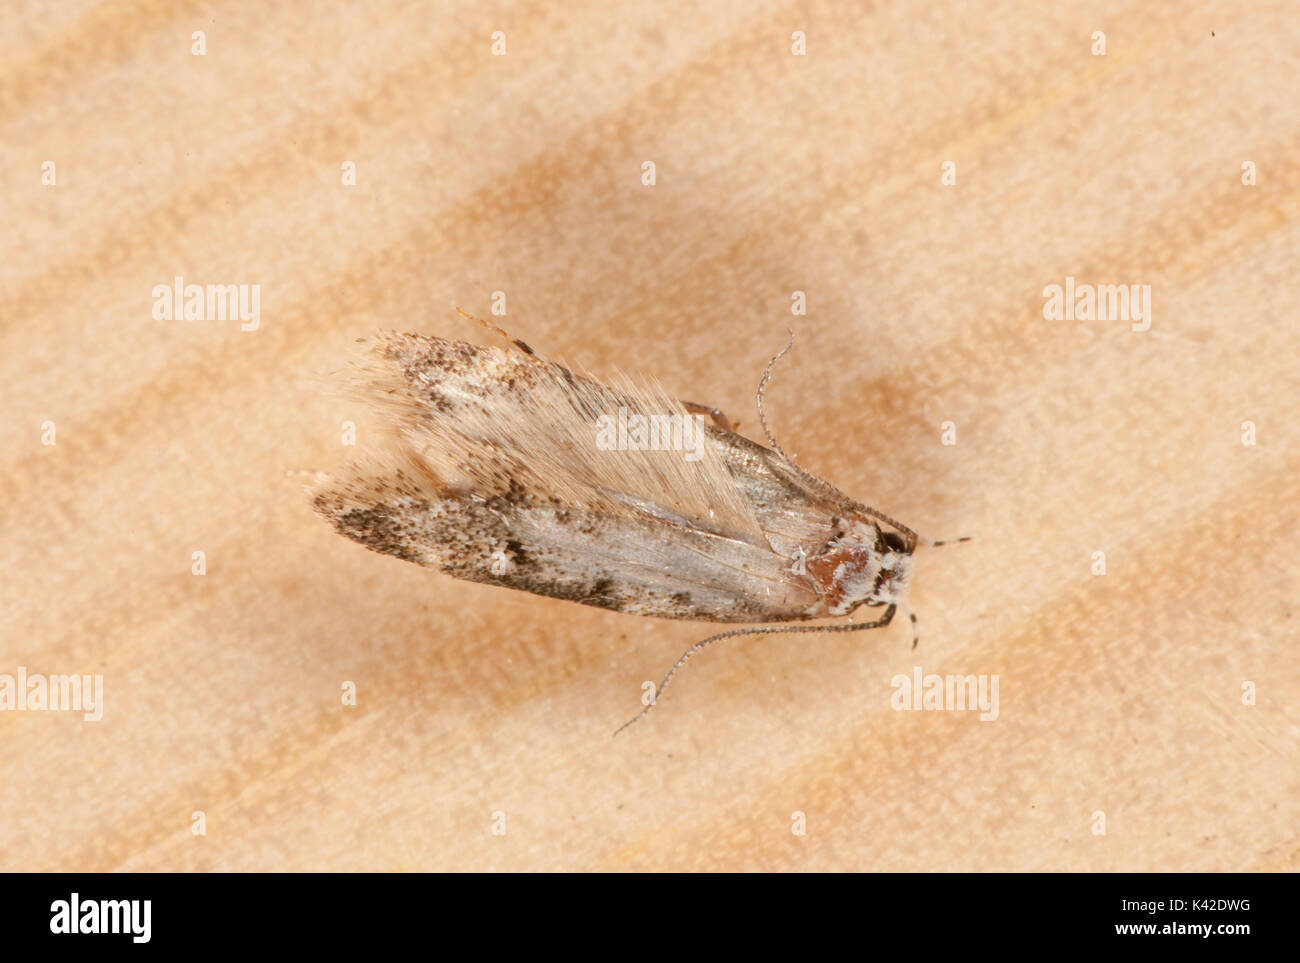 Lesser Wax Moth, Achroia grisella, pest to Honey Bee, Apis mellifera, Kent UK, caterpillars or larvae feed on honey, beeswax, stored pollen, bee shell Stock Photo